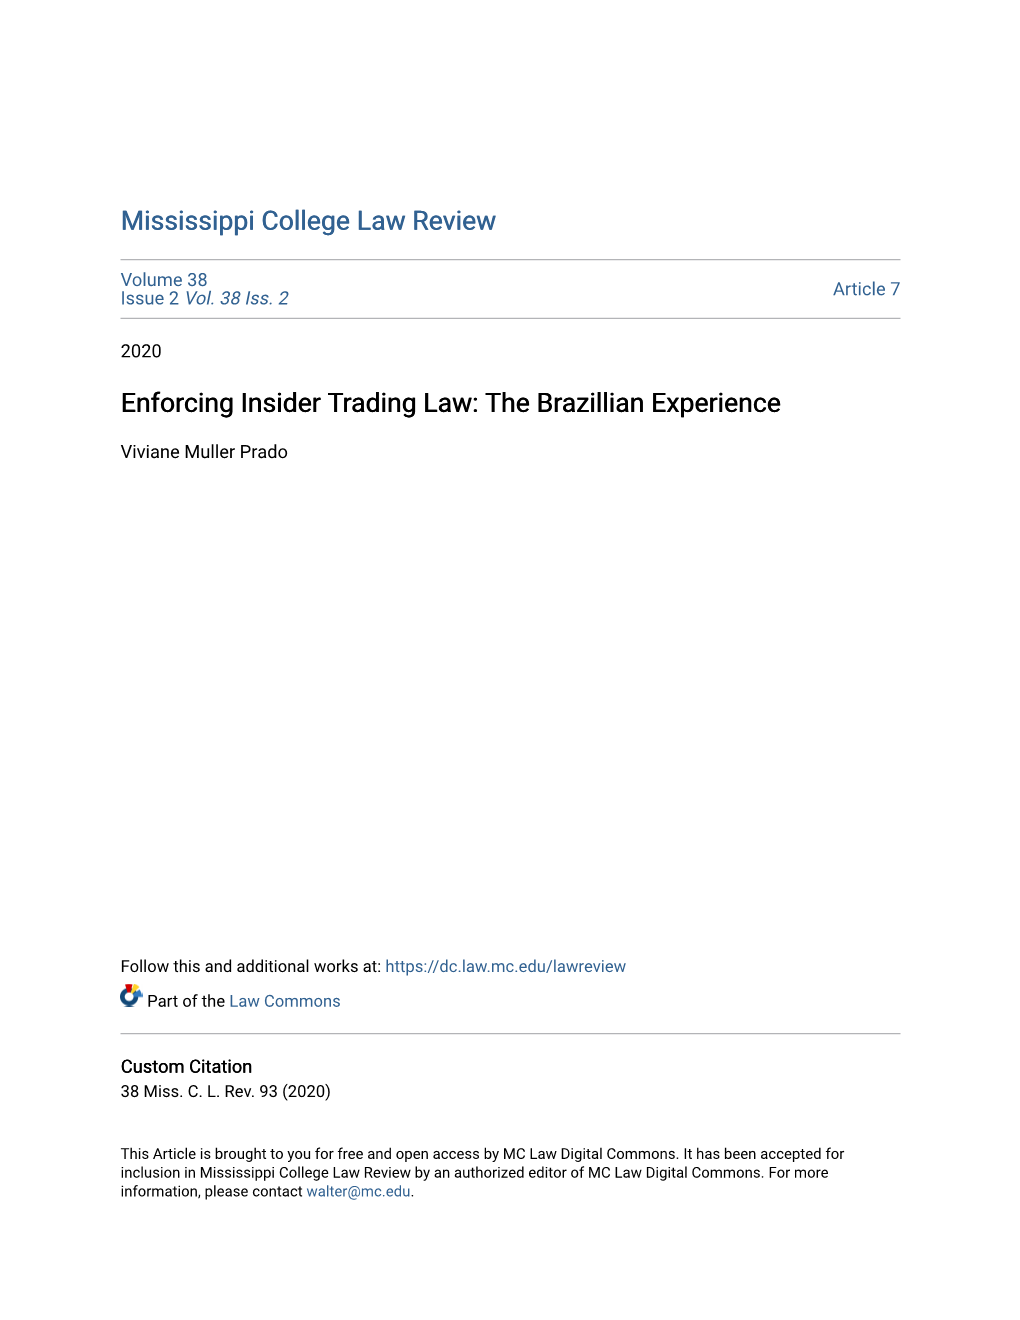 Enforcing Insider Trading Law: the Brazillian Experience